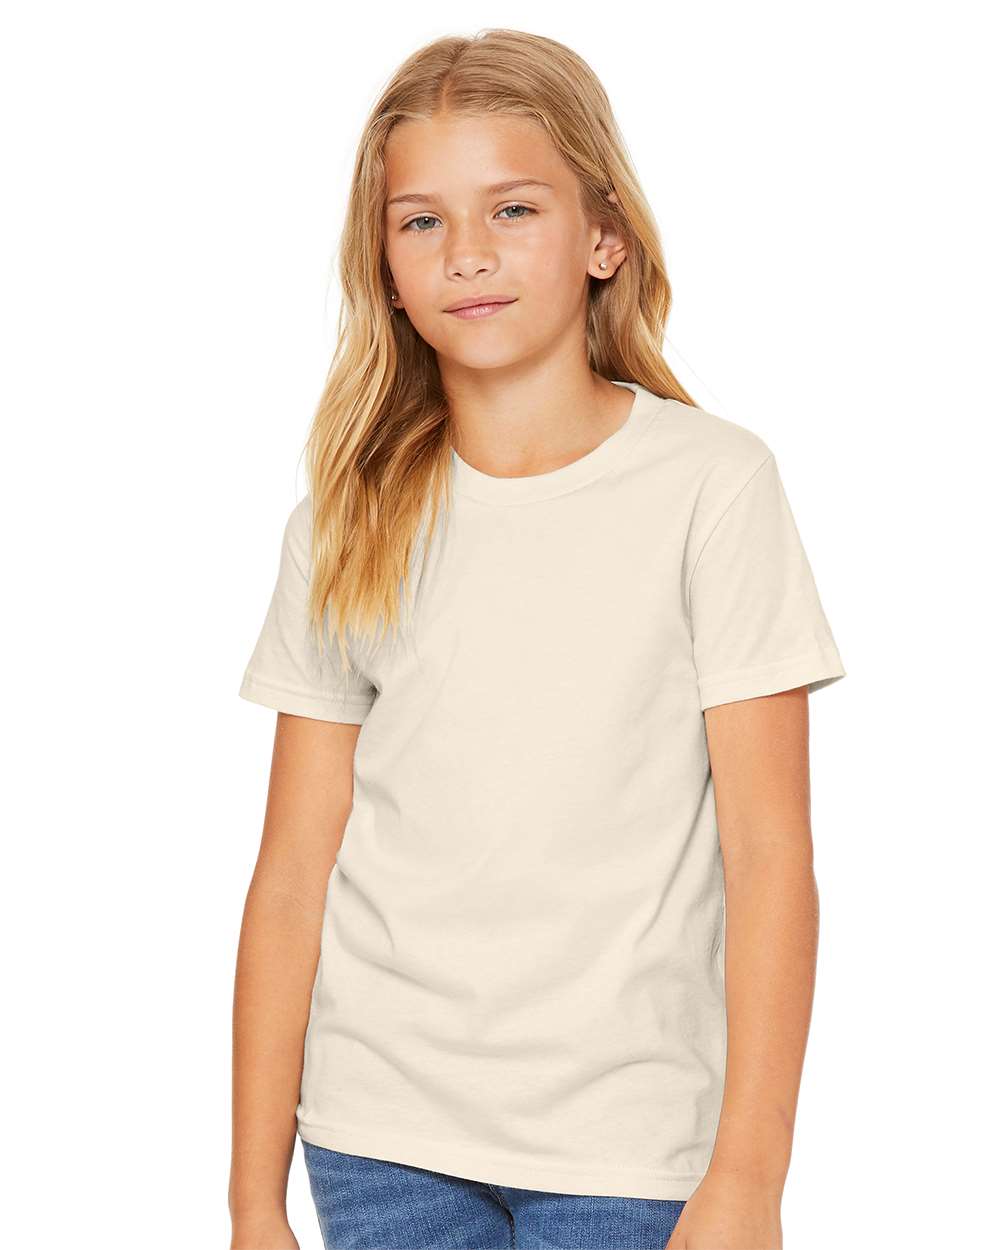 BELLA + CANVAS® Youth Jersey Tee